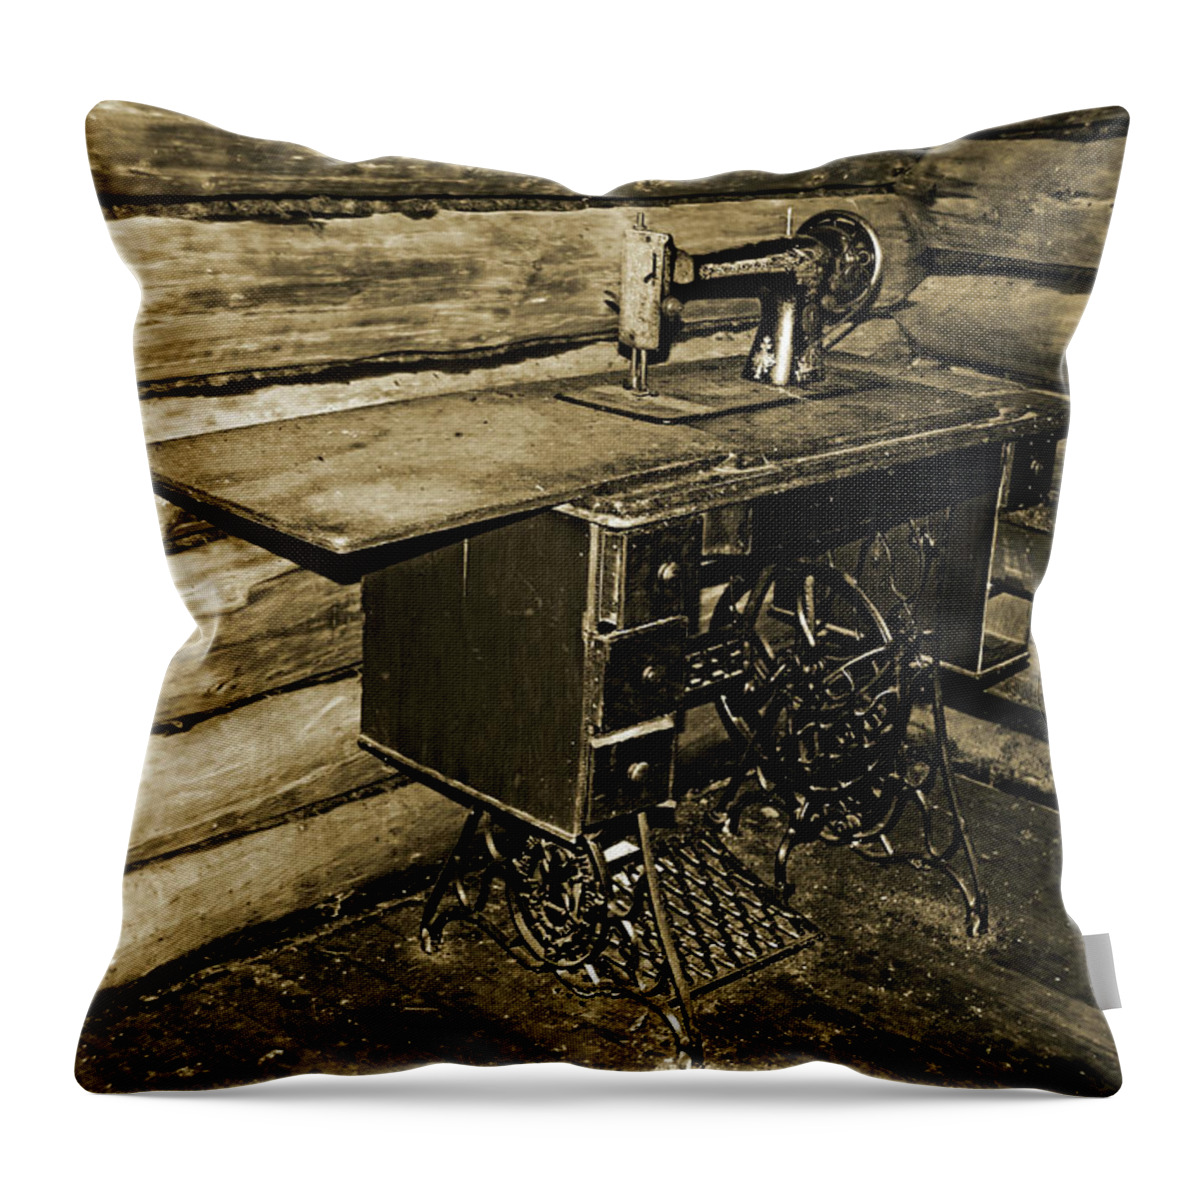 Singer Sewing Machine Throw Pillow featuring the photograph Vintage Singer Sewing Machine by Debbie Oppermann